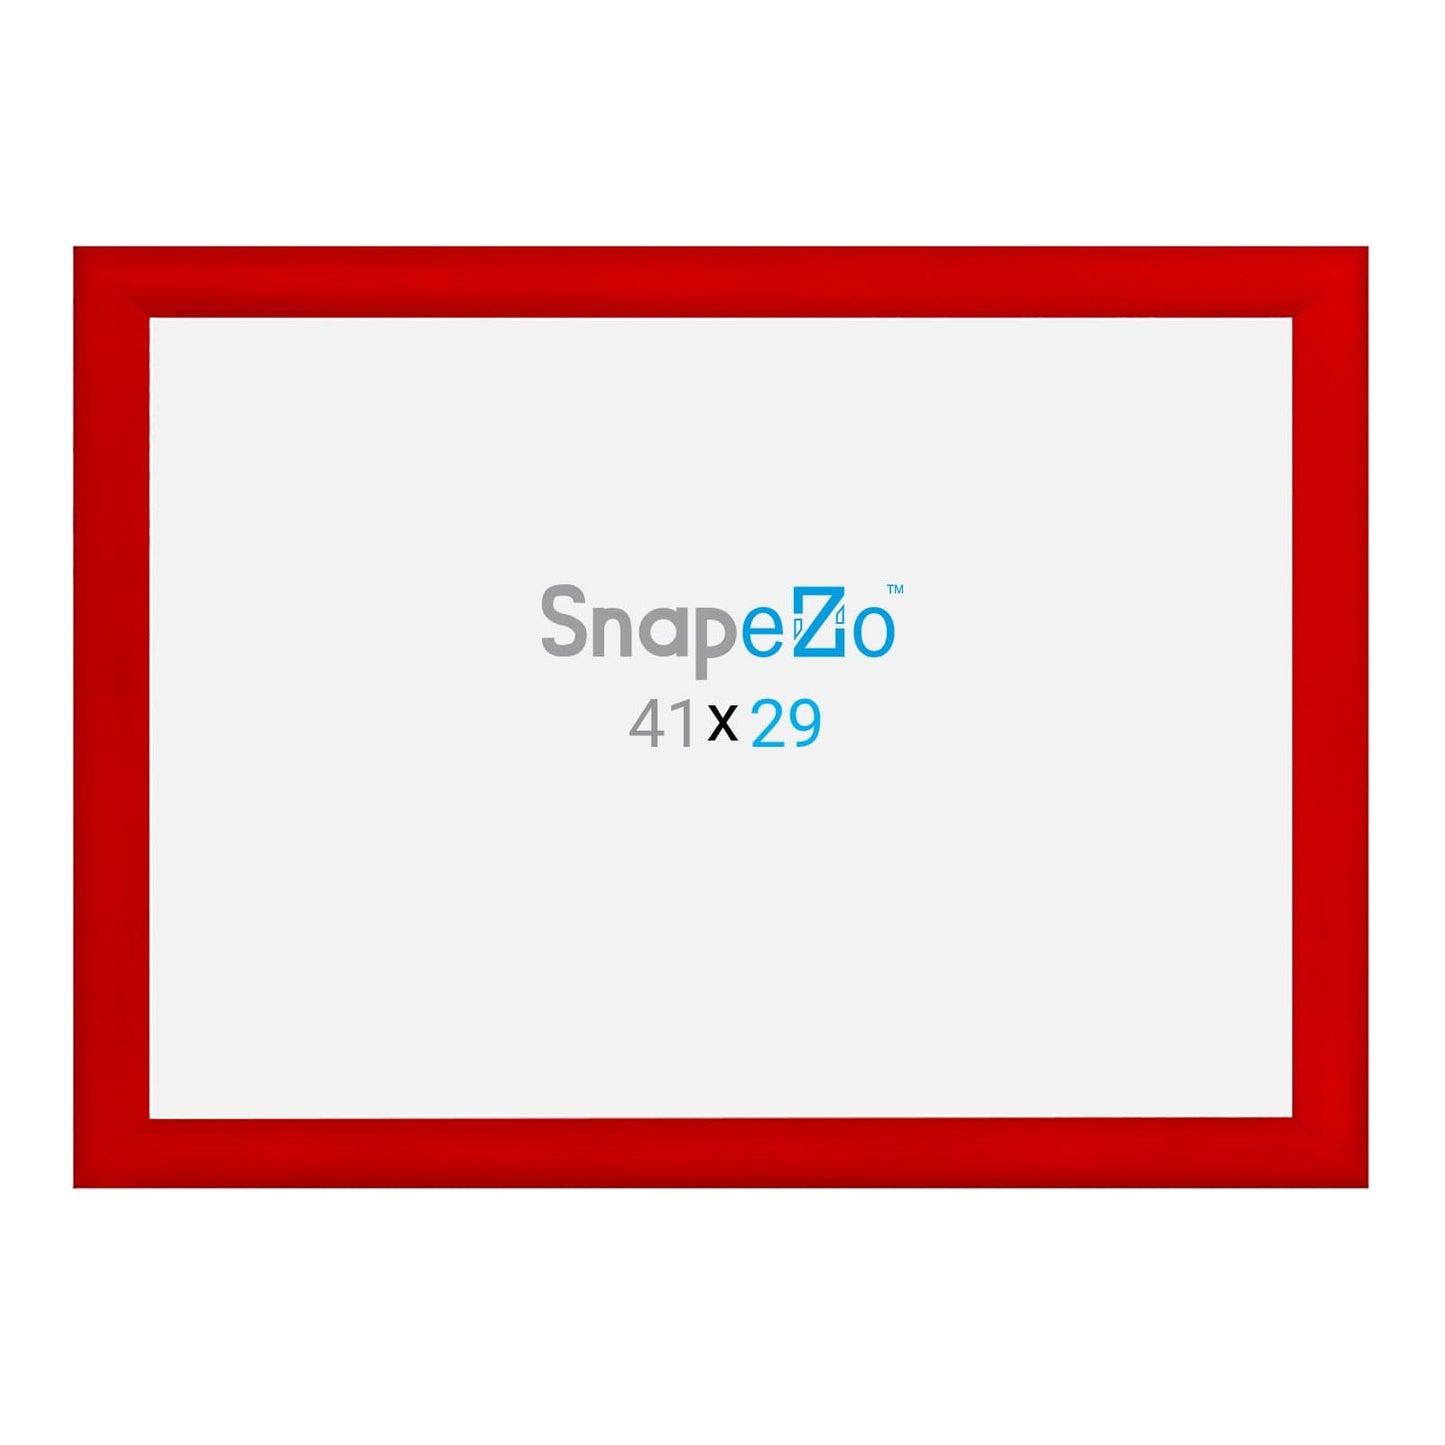 29x41 Red SnapeZo® Snap Frame - 1.2" Profile - Snap Frames Direct